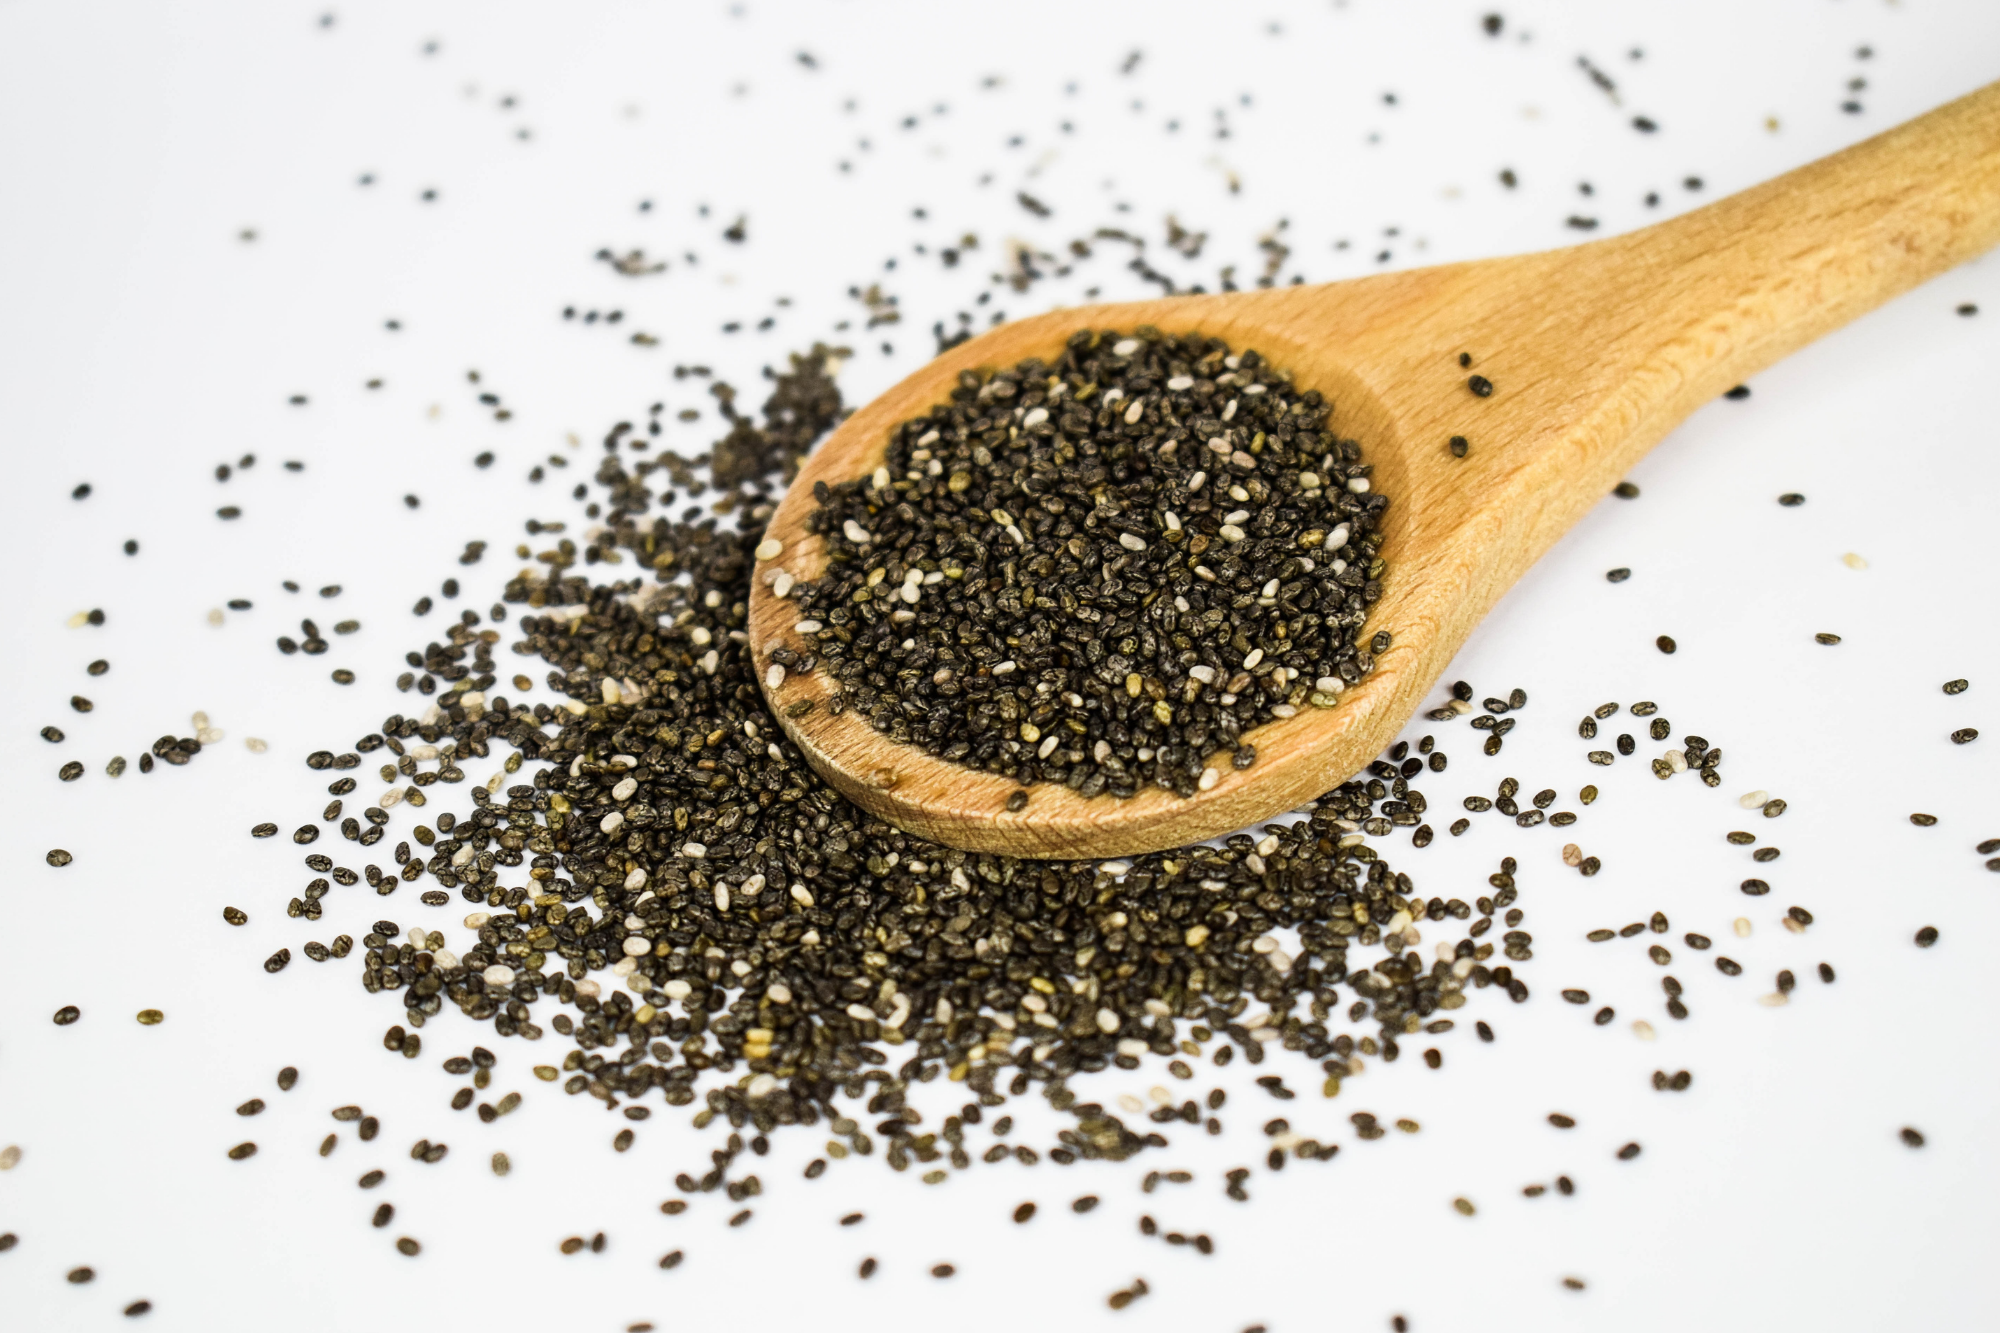 WHAT ARE CHIA SEEDS?